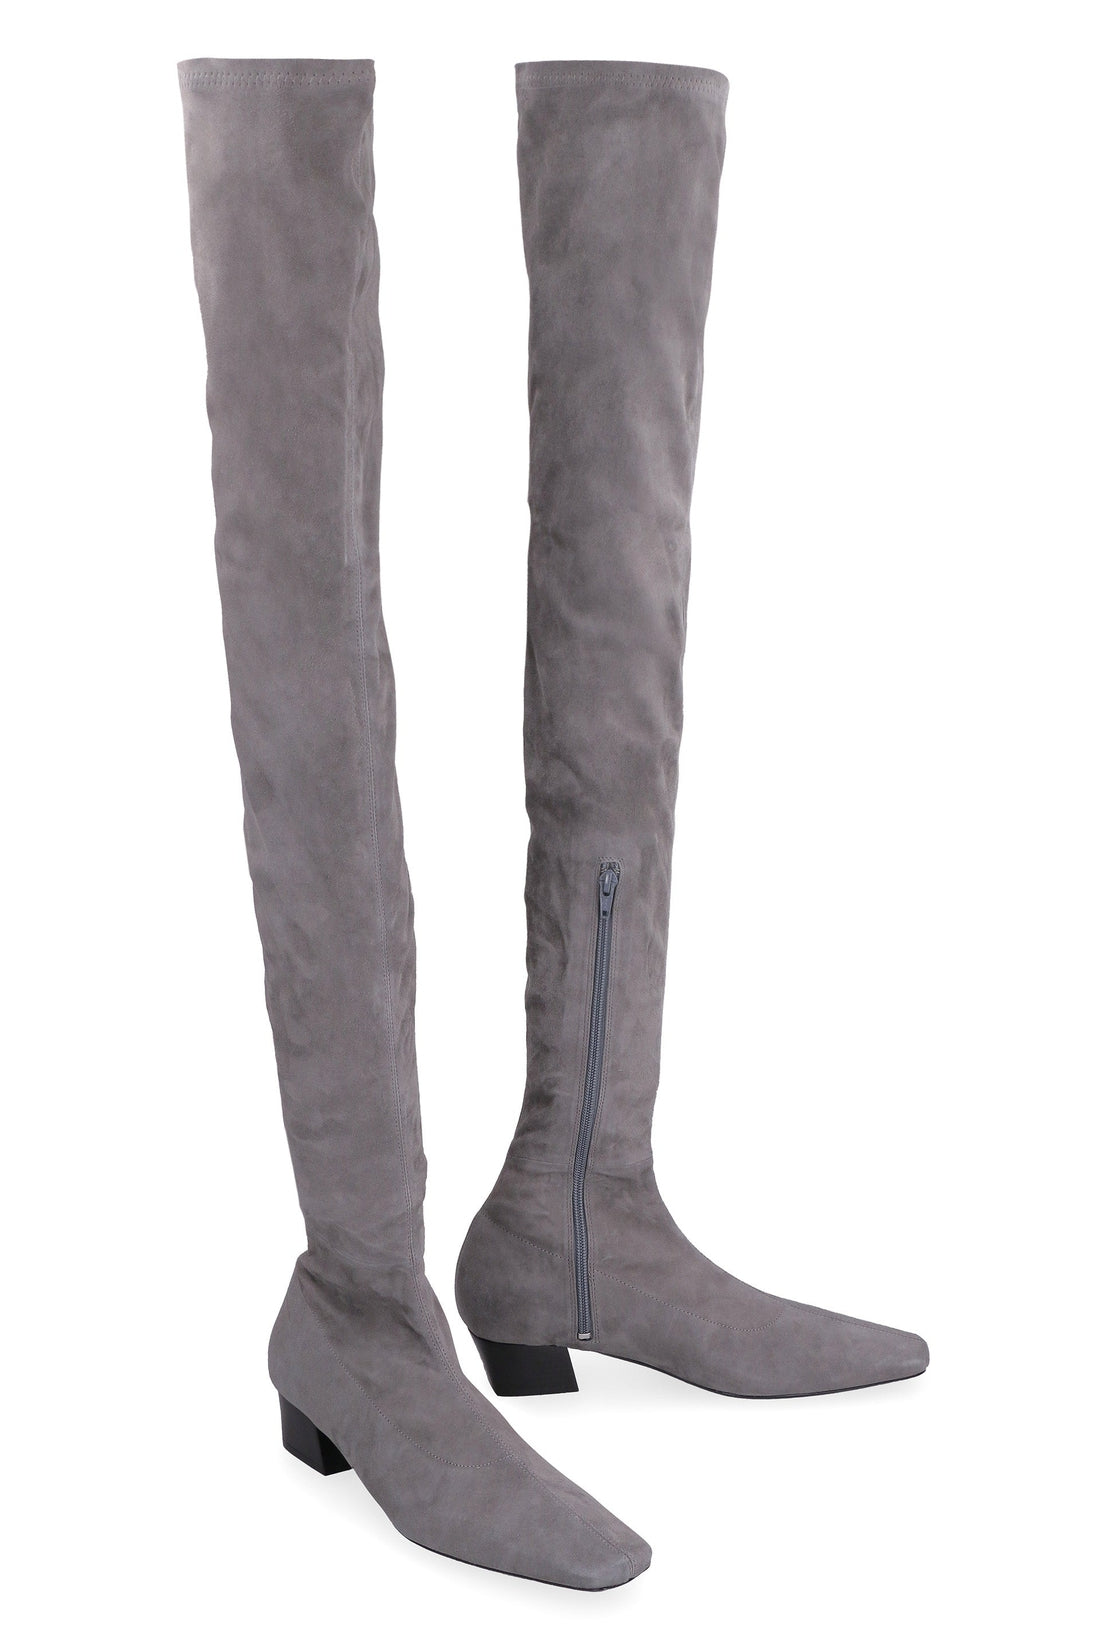 BY FAR-OUTLET-SALE-Colette stretch suede over the knee boots-ARCHIVIST